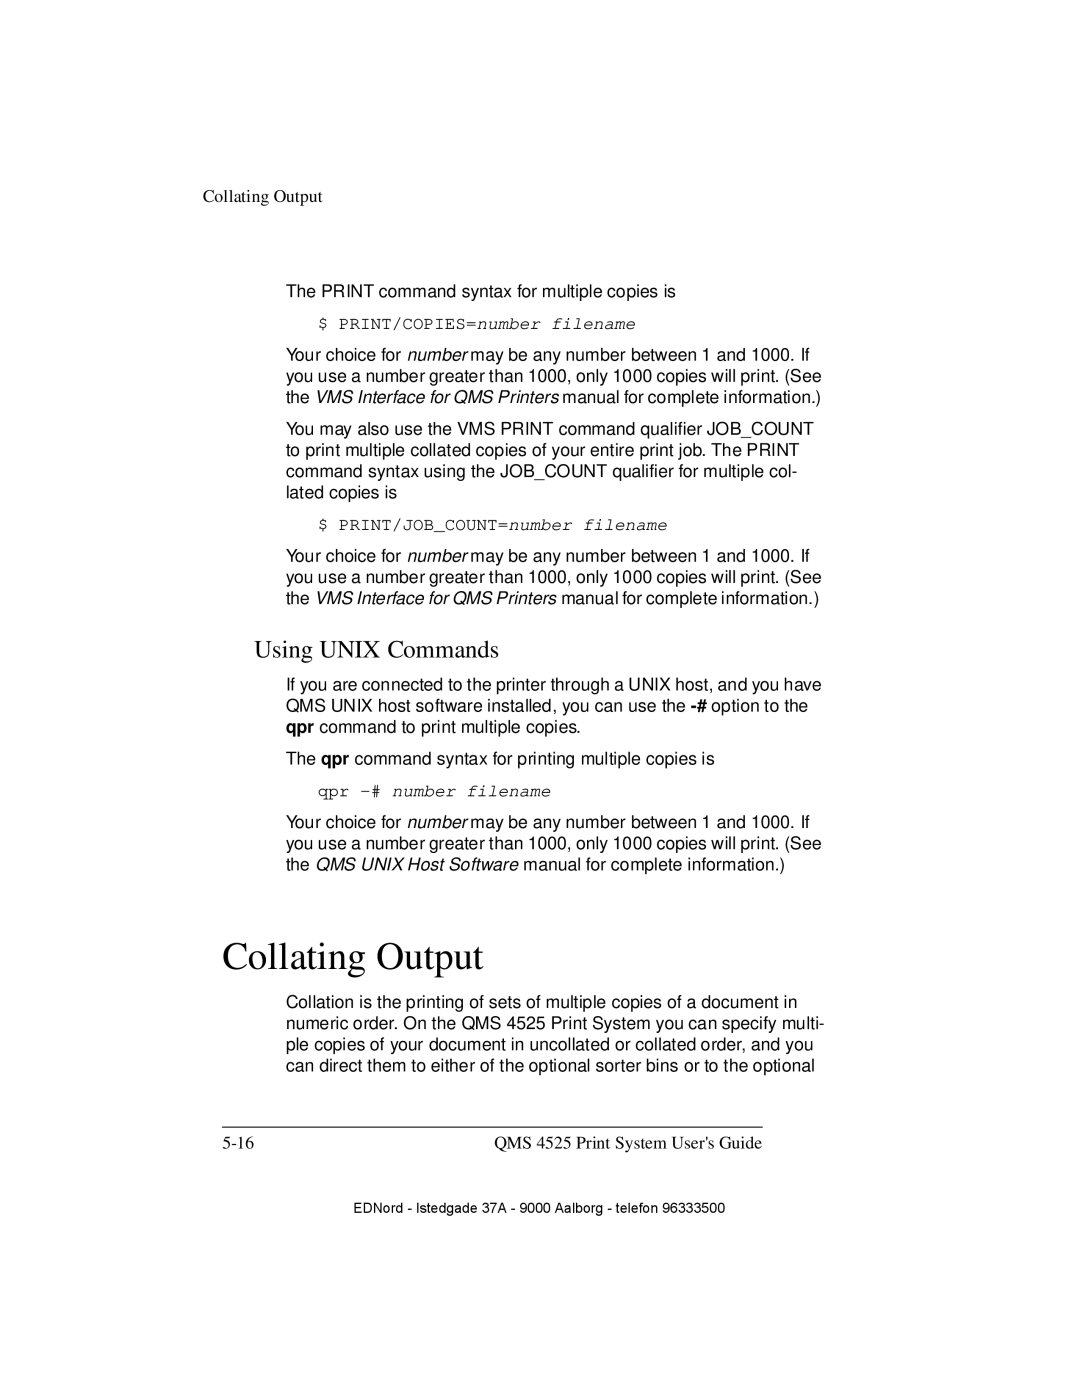 IBM QMS 4525 manual Collating Output, Using UNIX Commands, $ PRINT/COPIES=number filename, $ PRINT/JOBCOUNT=number filename 